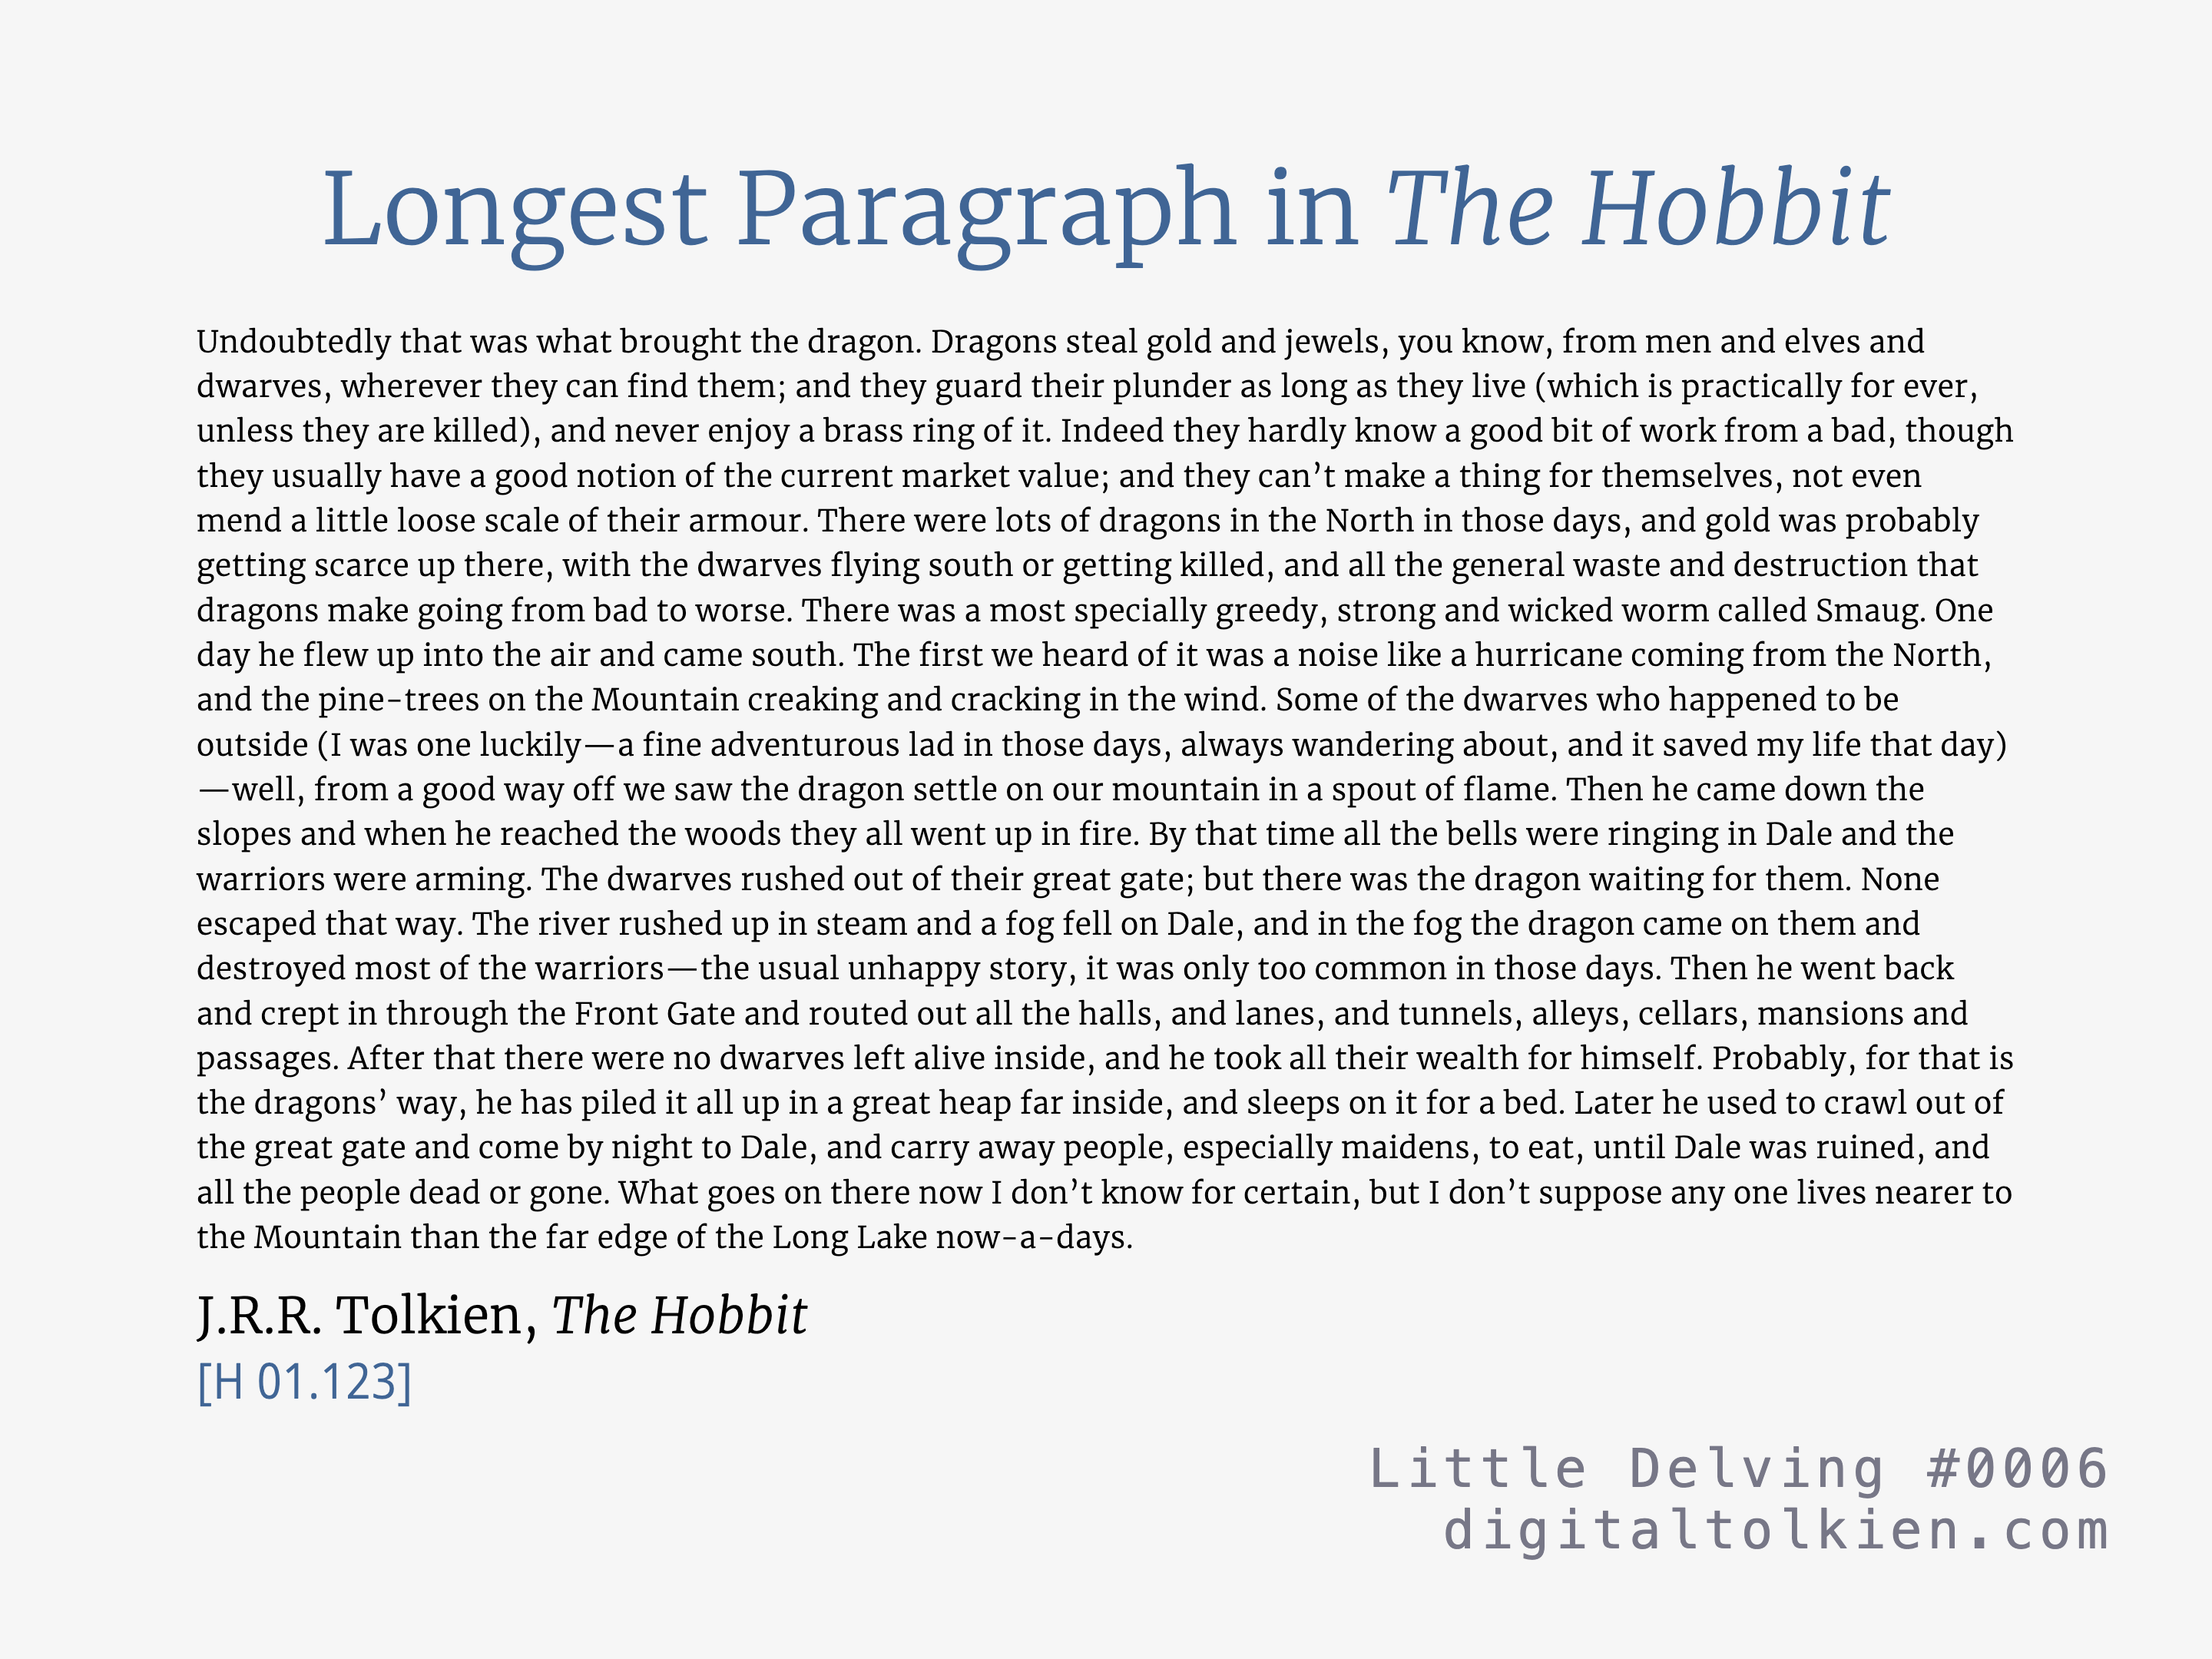 Longest Paragraph in The Hobbit
        Undoubtedly that was what brought the dragon. Dragons steal gold and jewels, you know, from men and elves and dwarves, wherever they can find them; and they guard their plunder as long as they live (which is practically for ever, unless they are killed), and never enjoy a brass ring of it. Indeed they hardly know a good bit of work from a bad, though they usually have a good notion of the current market value; and they can’t make a thing for themselves, not even mend a little loose scale of their armour. There were lots of dragons in the North in those days, and gold was probably getting scarce up there, with the dwarves flying south or getting killed, and all the general waste and destruction that dragons make going from bad to worse. There was a most specially greedy, strong and wicked worm called Smaug. One day he flew up into the air and came south. The first we heard of it was a noise like a hurricane coming from the North, and the pine-trees on the Mountain creaking and cracking in the wind. Some of the dwarves who happened to be outside (I was one luckily—a fine adventurous lad in those days, always wandering about, and it saved my life that day)—well, from a good way off we saw the dragon settle on our mountain in a spout of flame. Then he came down the slopes and when he reached the woods they all went up in fire. By that time all the bells were ringing in Dale and the warriors were arming. The dwarves rushed out of their great gate; but there was the dragon waiting for them. None escaped that way. The river rushed up in steam and a fog fell on Dale, and in the fog the dragon came on them and destroyed most of the warriors—the usual unhappy story, it was only too common in those days. Then he went back and crept in through the Front Gate and routed out all the halls, and lanes, and tunnels, alleys, cellars, mansions and passages. After that there were no dwarves left alive inside, and he took all their wealth for himself. Probably, for that is the dragons’ way, he has piled it all up in a great heap far inside, and sleeps on it for a bed. Later he used to crawl out of the great gate and come by night to Dale, and carry away people, especially maidens, to eat, until Dale was ruined, and all the people dead or gone. What goes on there now I don’t know for certain, but I don’t suppose any one lives nearer to the Mountain than the far edge of the Long Lake now-a-days.
        J.R.R. Tolkien, The Hobbit
        [H 01.123]
        Little Delving #0006
        digitaltolkien.com